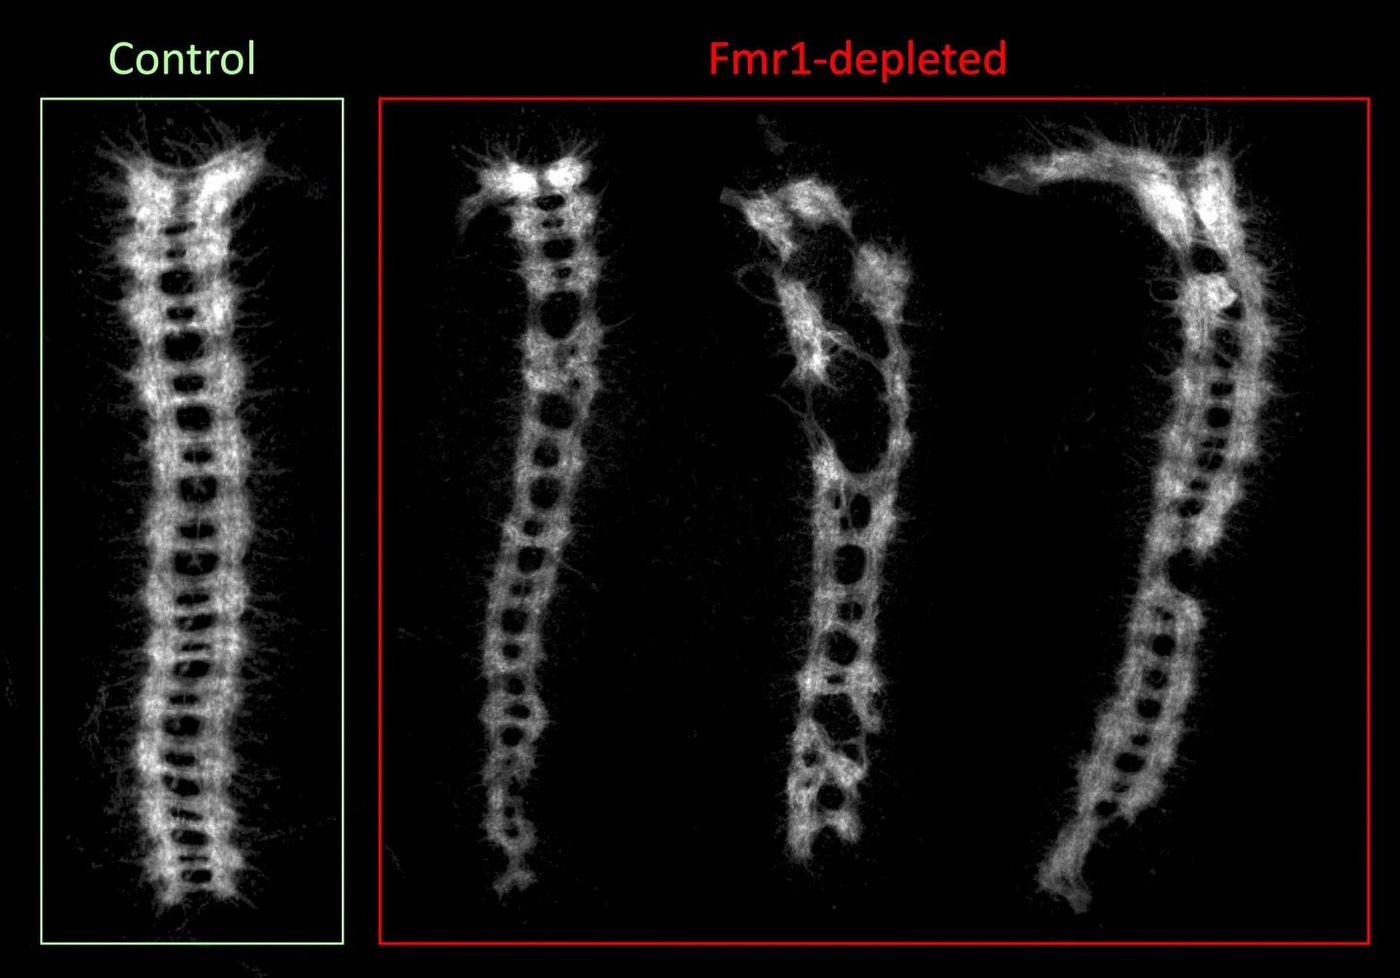 This image shows an example of defects in the development of the embryonic central nervous system in stored eggs that lacked the Fmr1 gene -- stored being the key word, since un-stored eggs showed normal development. Analogous to the spinal cord, the ladder-like ventral nerve cords on the right are from stored eggs lacking in Fmr1. The image on the left is a normal ventral nerve cord with functioning Fmr1. / Credit:  Courtesy of Ethan Greenblatt and Allan Spradling.